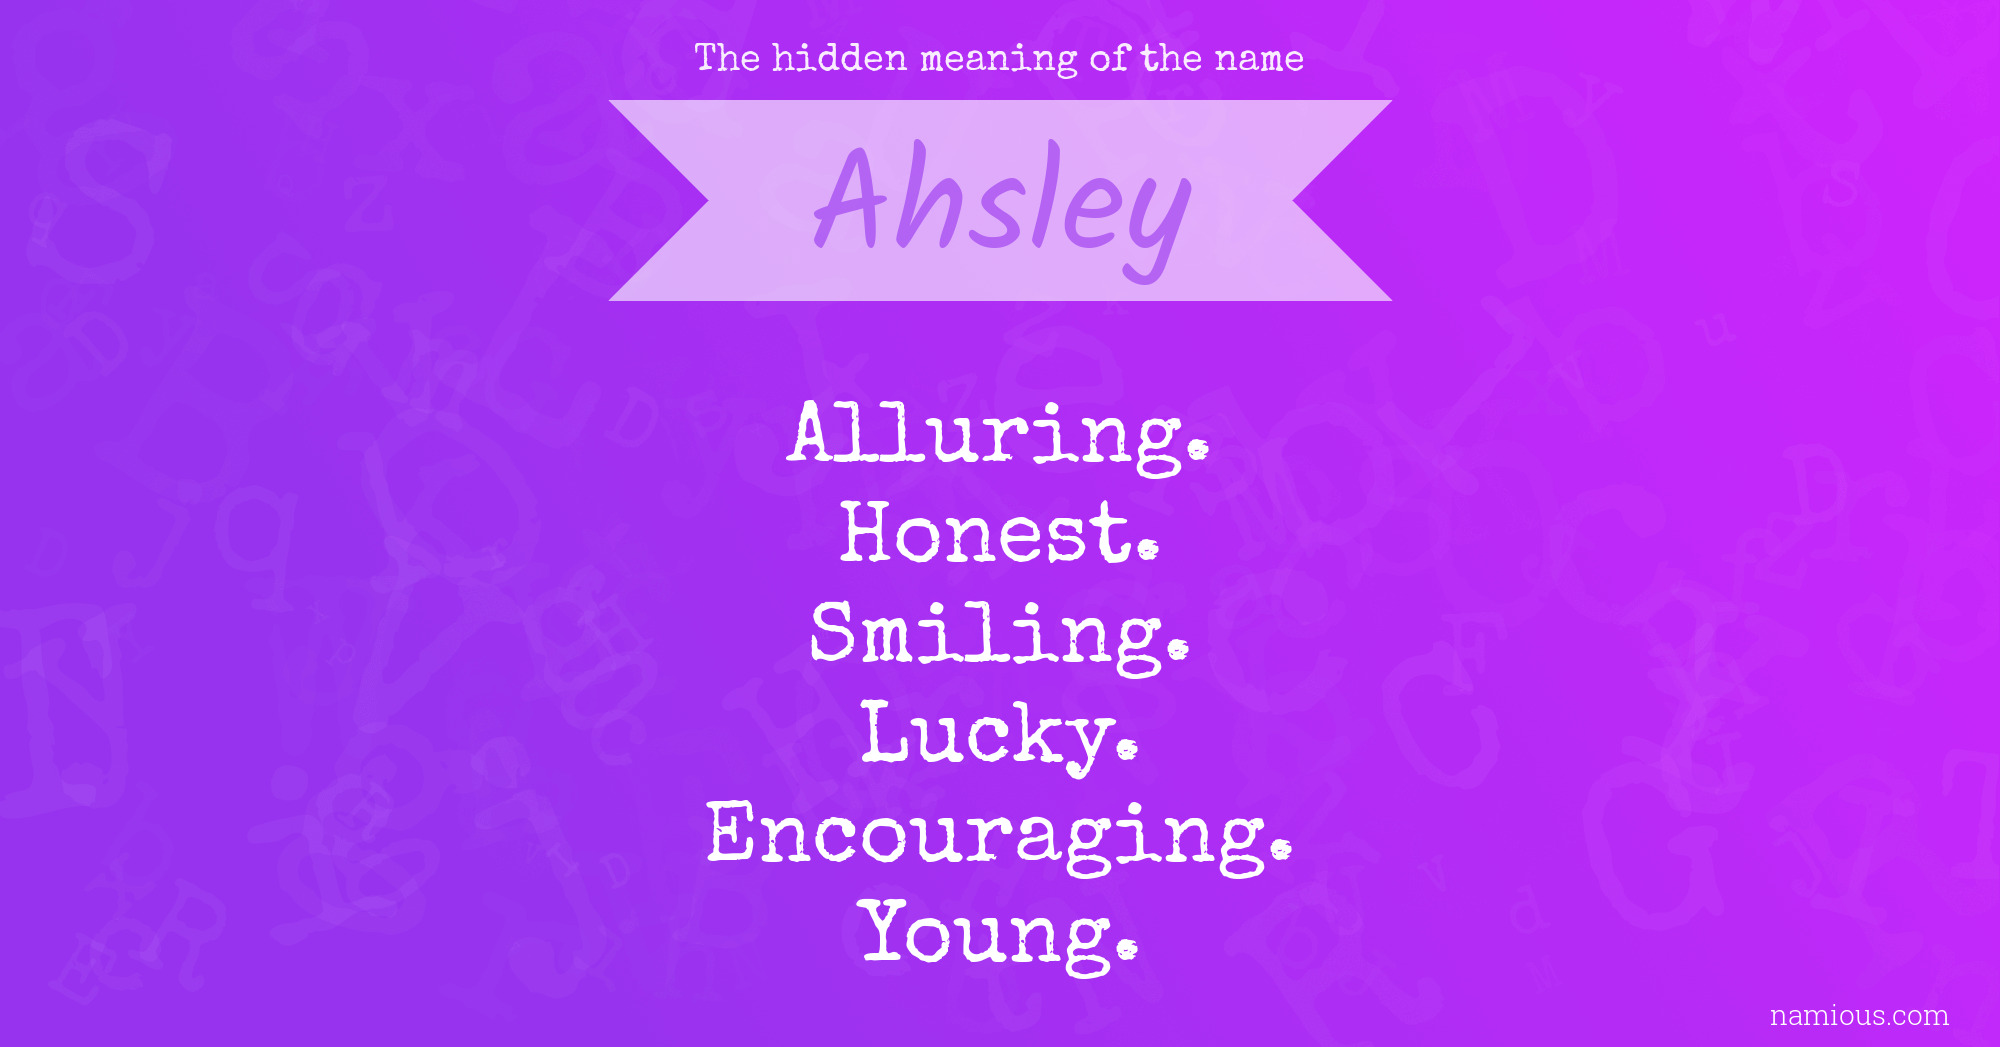 The hidden meaning of the name Ahsley